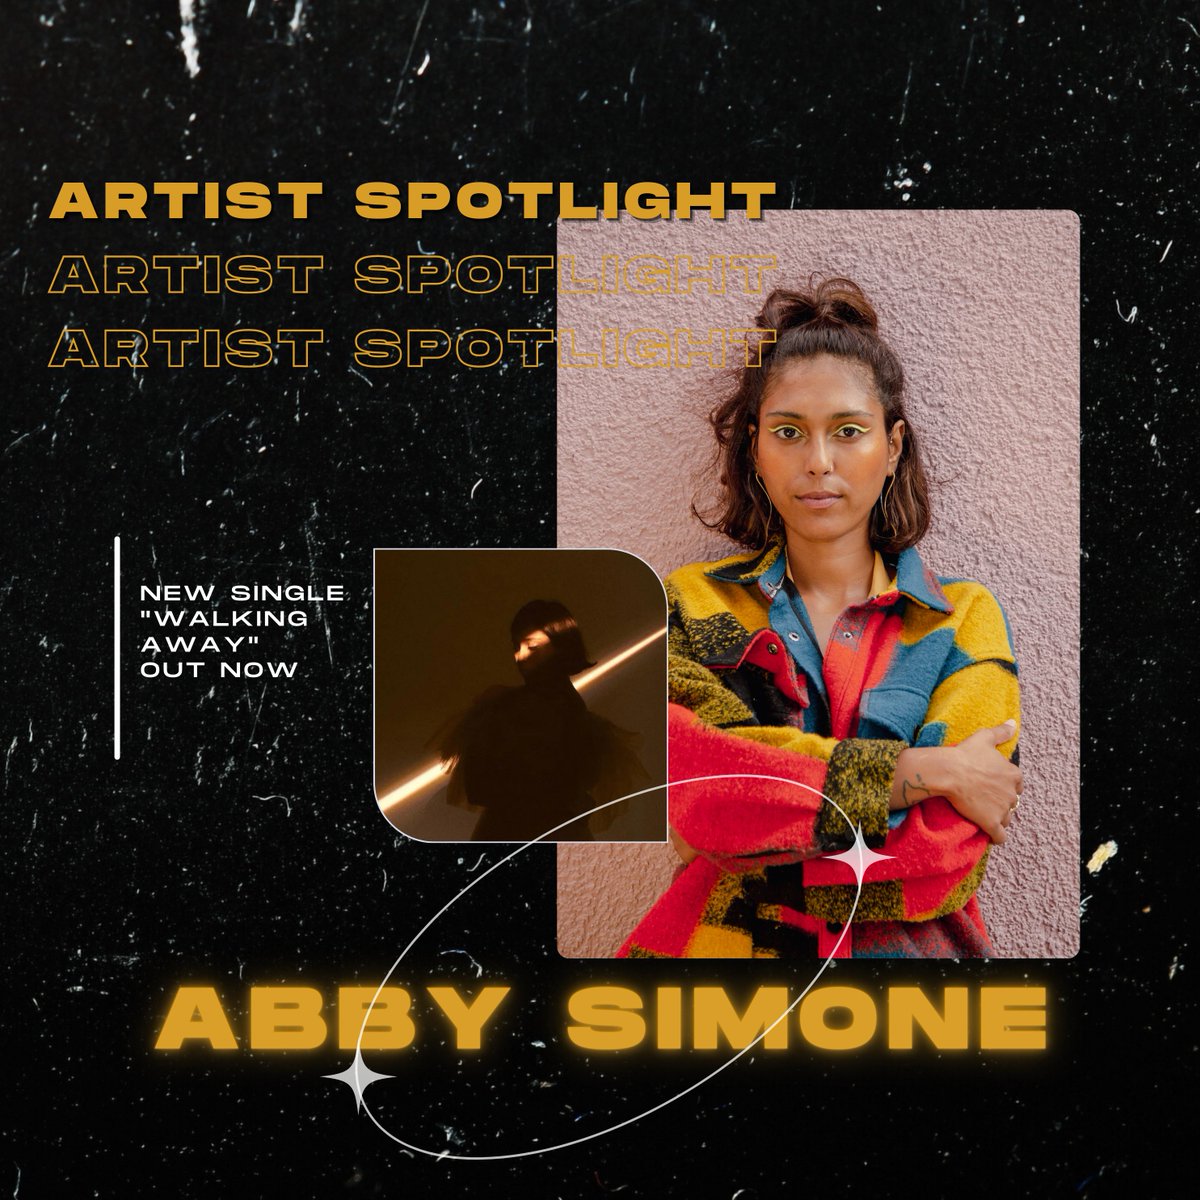 Happy Tuesday – today’s artist spotlight goes out to @abbysimonemusic – her latest pop single ‘Walking Away’ is out now!!

have you listened to her new track? what do you think?

--
#orchardambassador #abbysimone #walkingaway #NapoliCremonese #WOLLIV #Boomerissima #TikTok